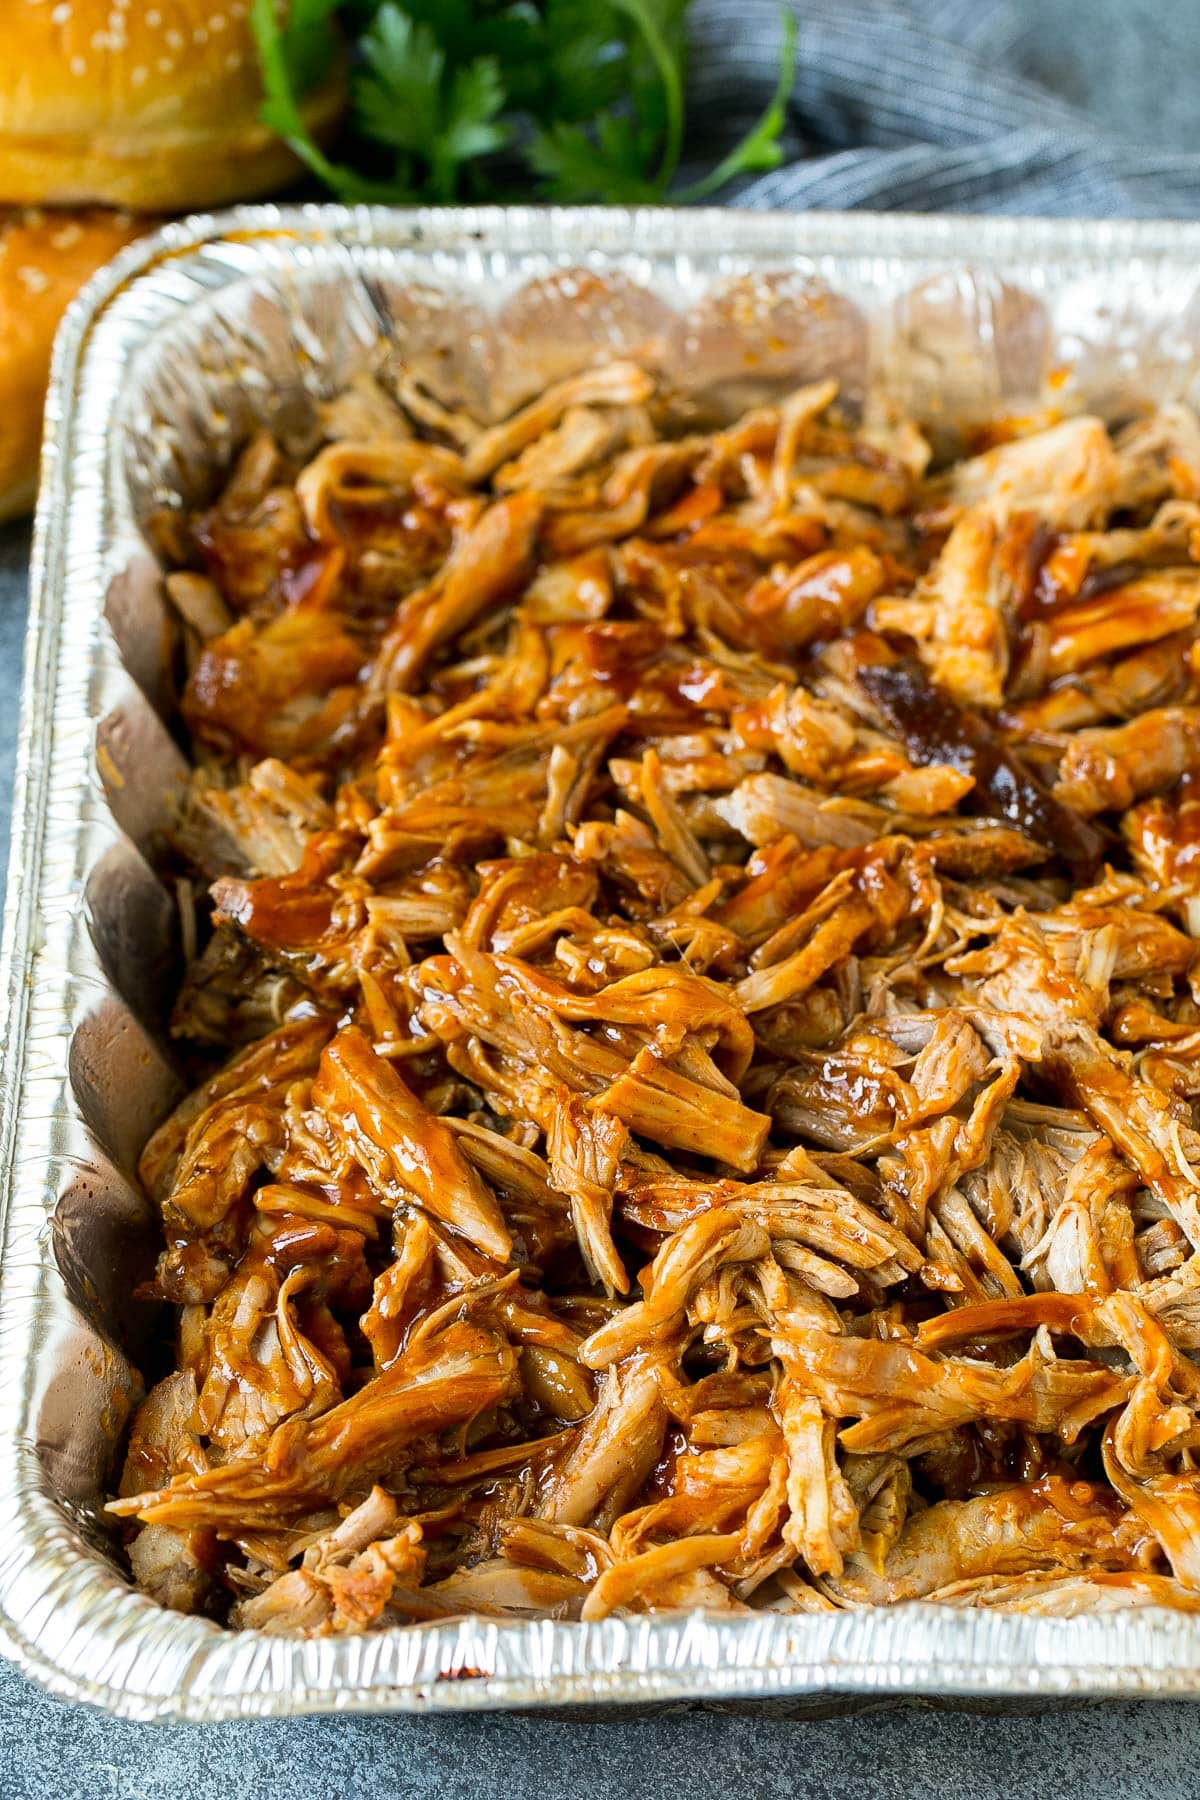 Smoked pulled pork in a metal tray with BBQ sauce.